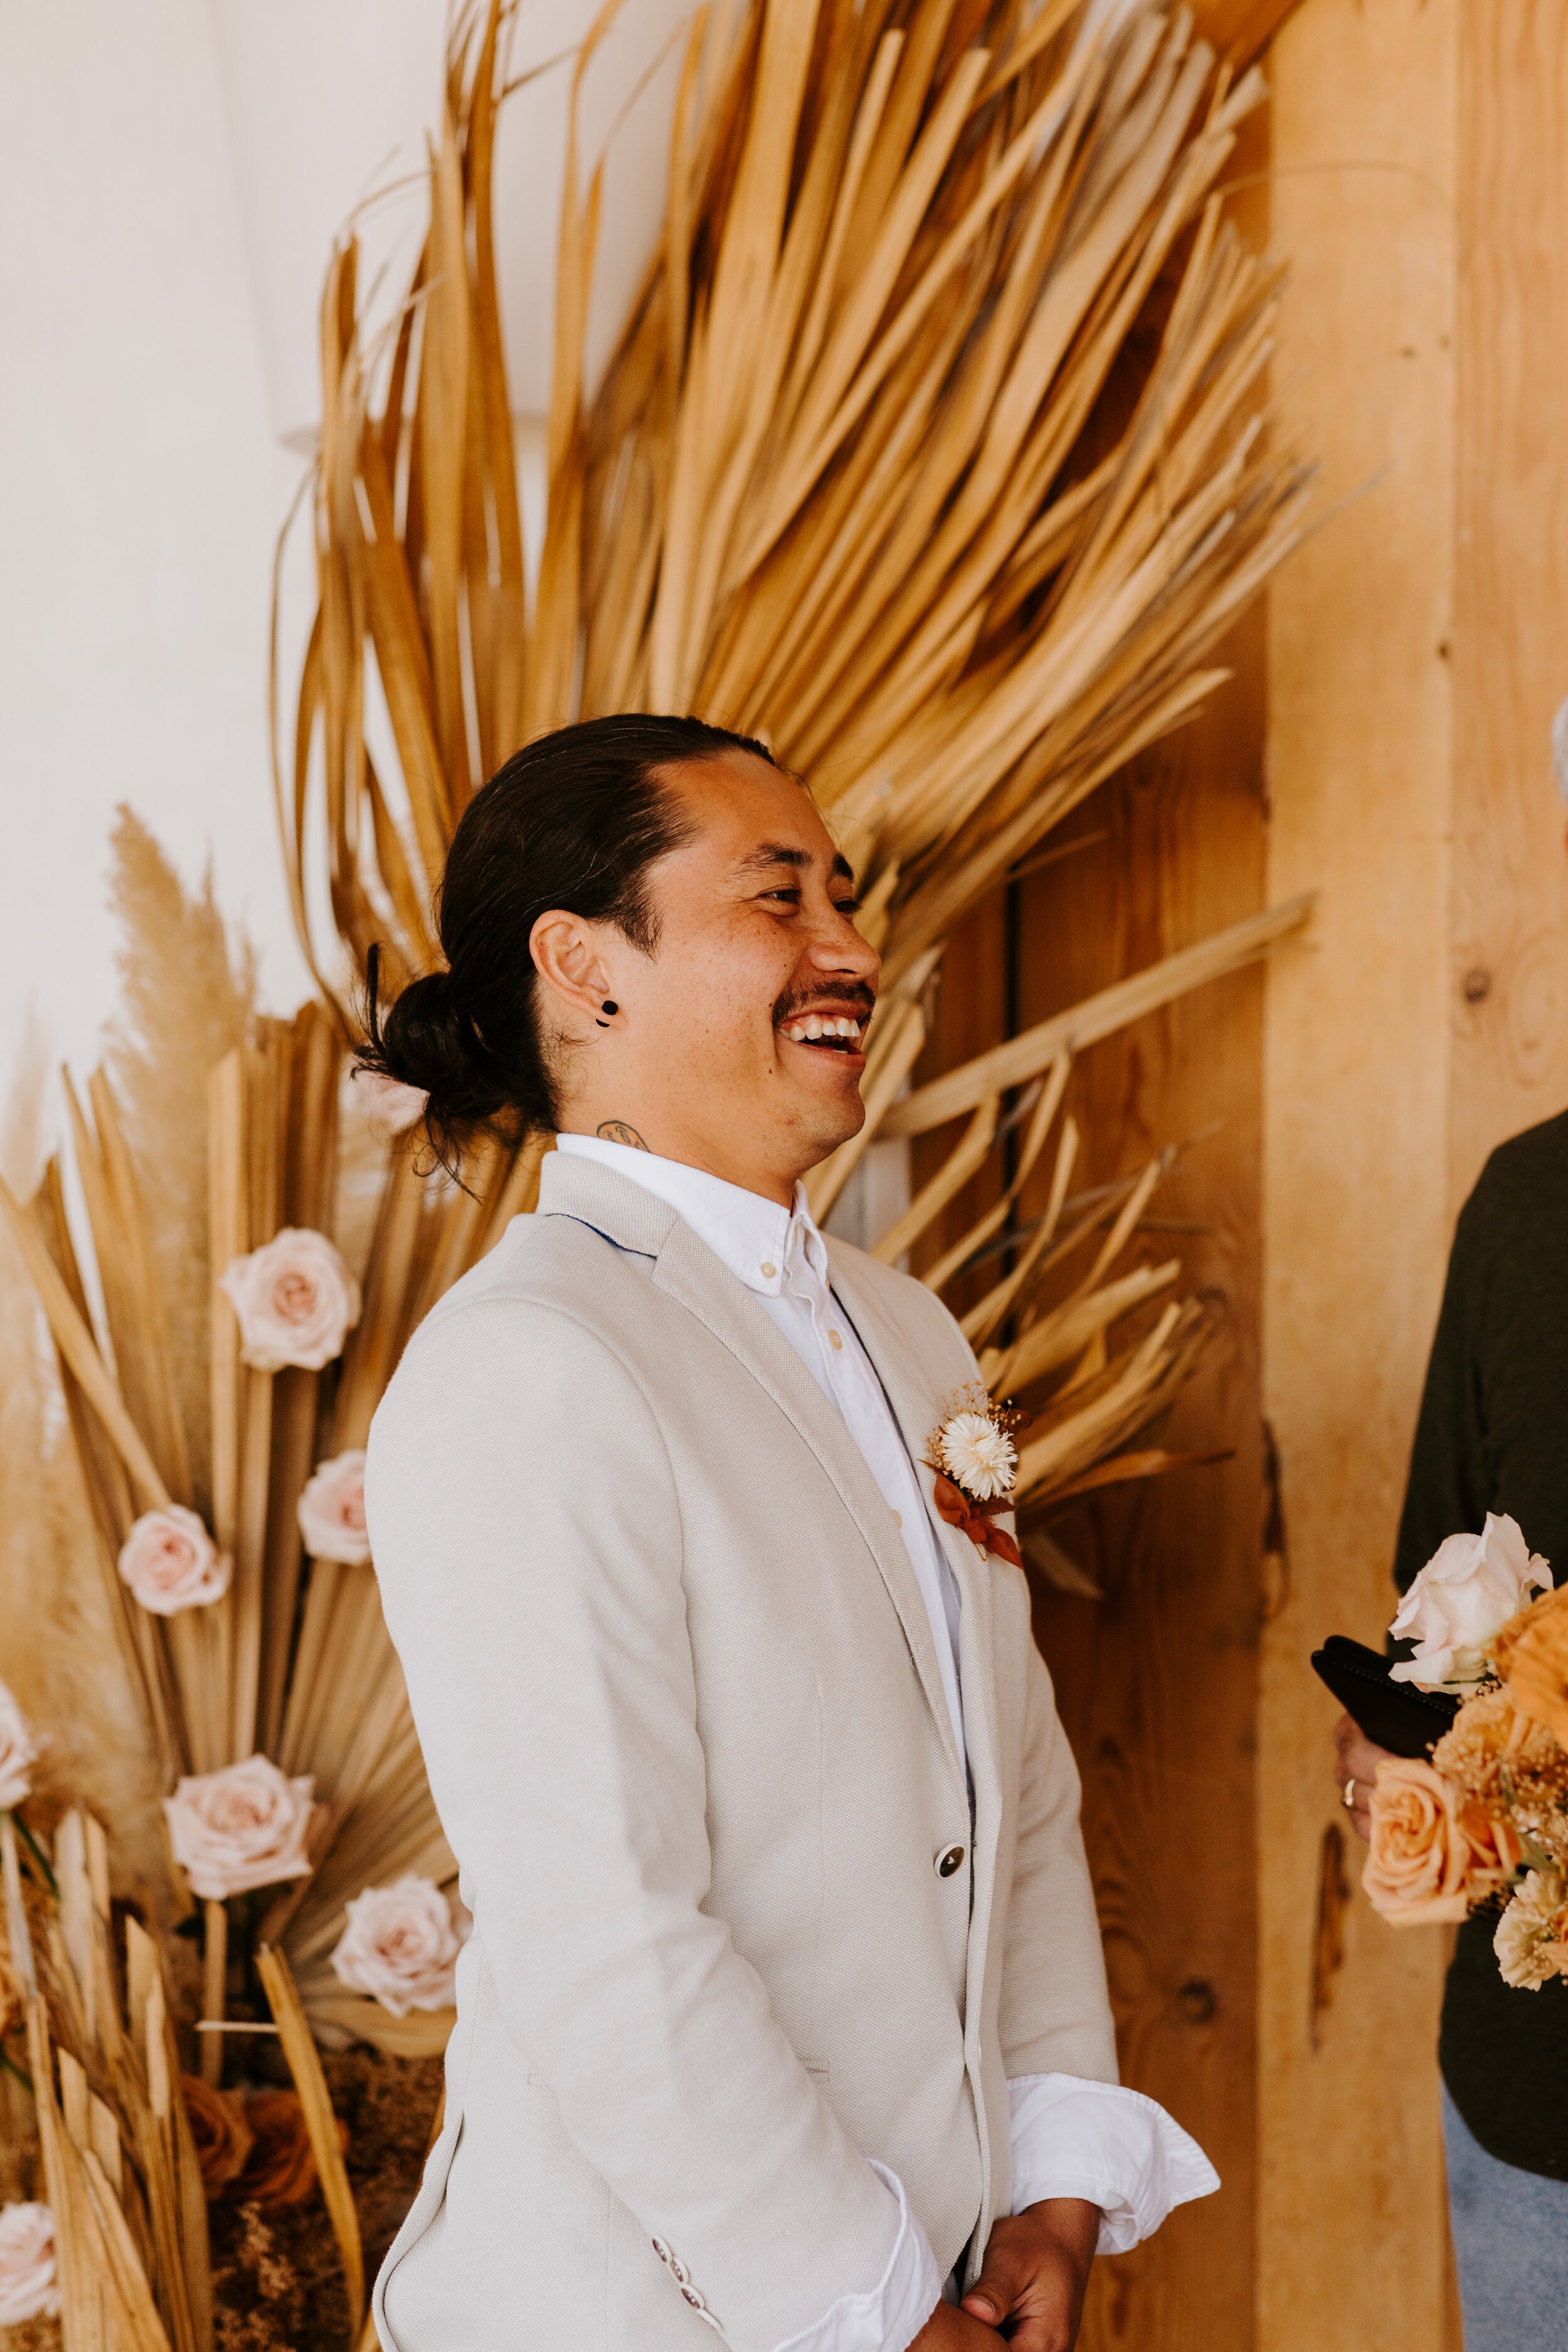 Joshua Tree Elopement at Desert Wild Airbnb | Boho neutral and rust color palette | Tida Svy | www.tidasvy.com